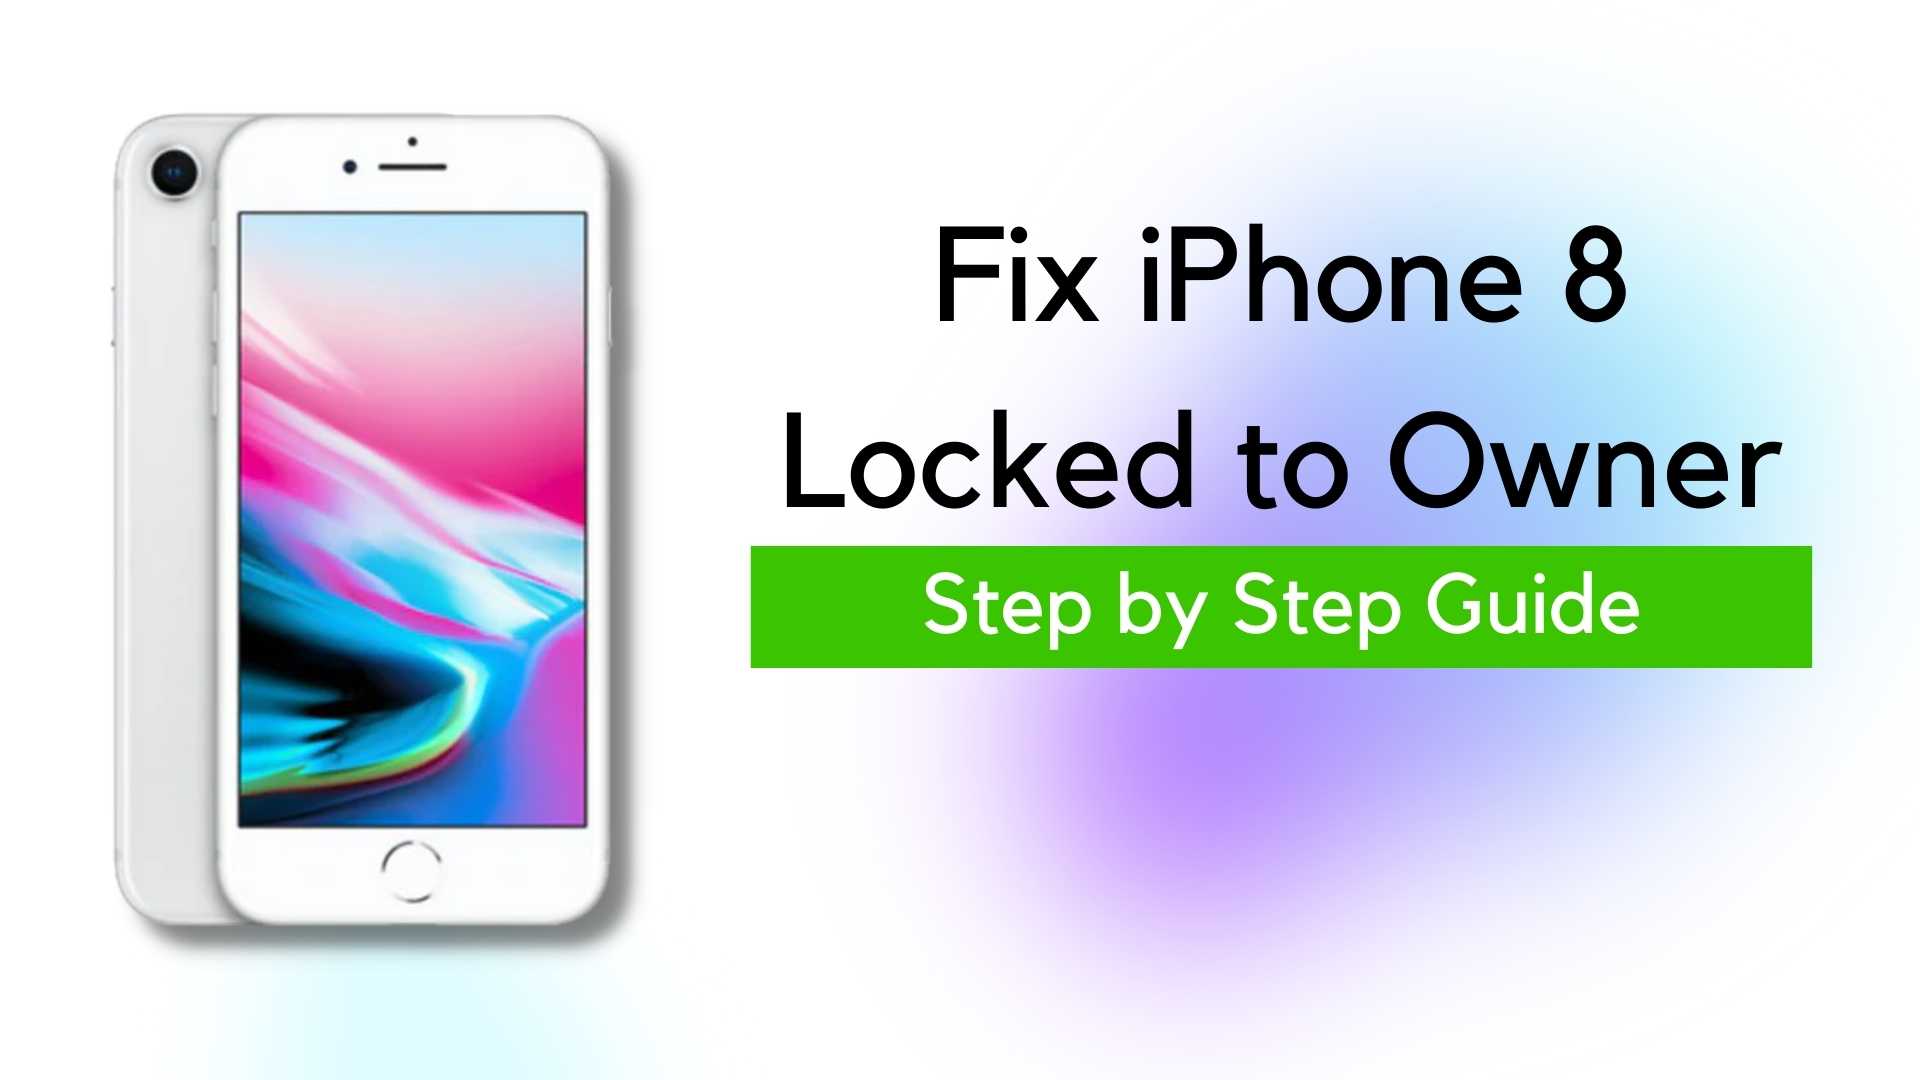 Fix iPhone 8 Locked to Owner